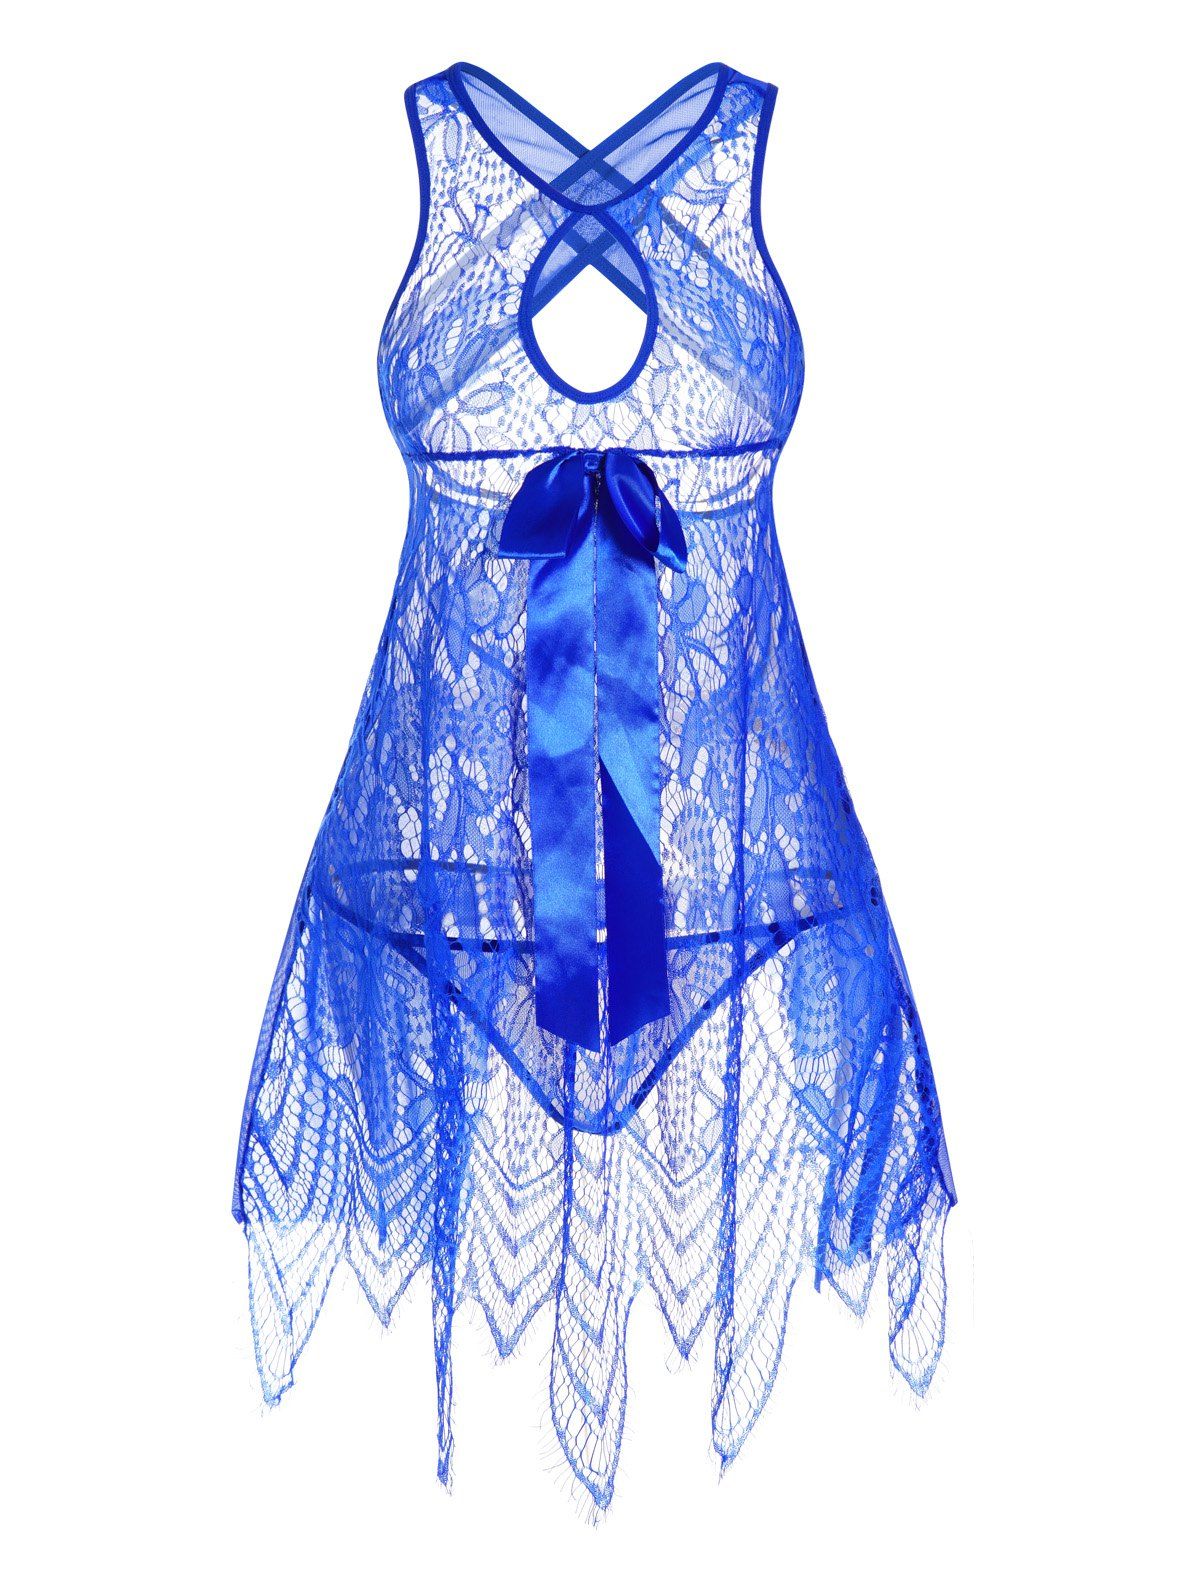 Hollow Out Lace See Thru Mesh Panel Cut Out Halter Crisscross Bowknot Asymmetric Lingeries Top And T Back Lingeries Set - BLUE ONE SIZE